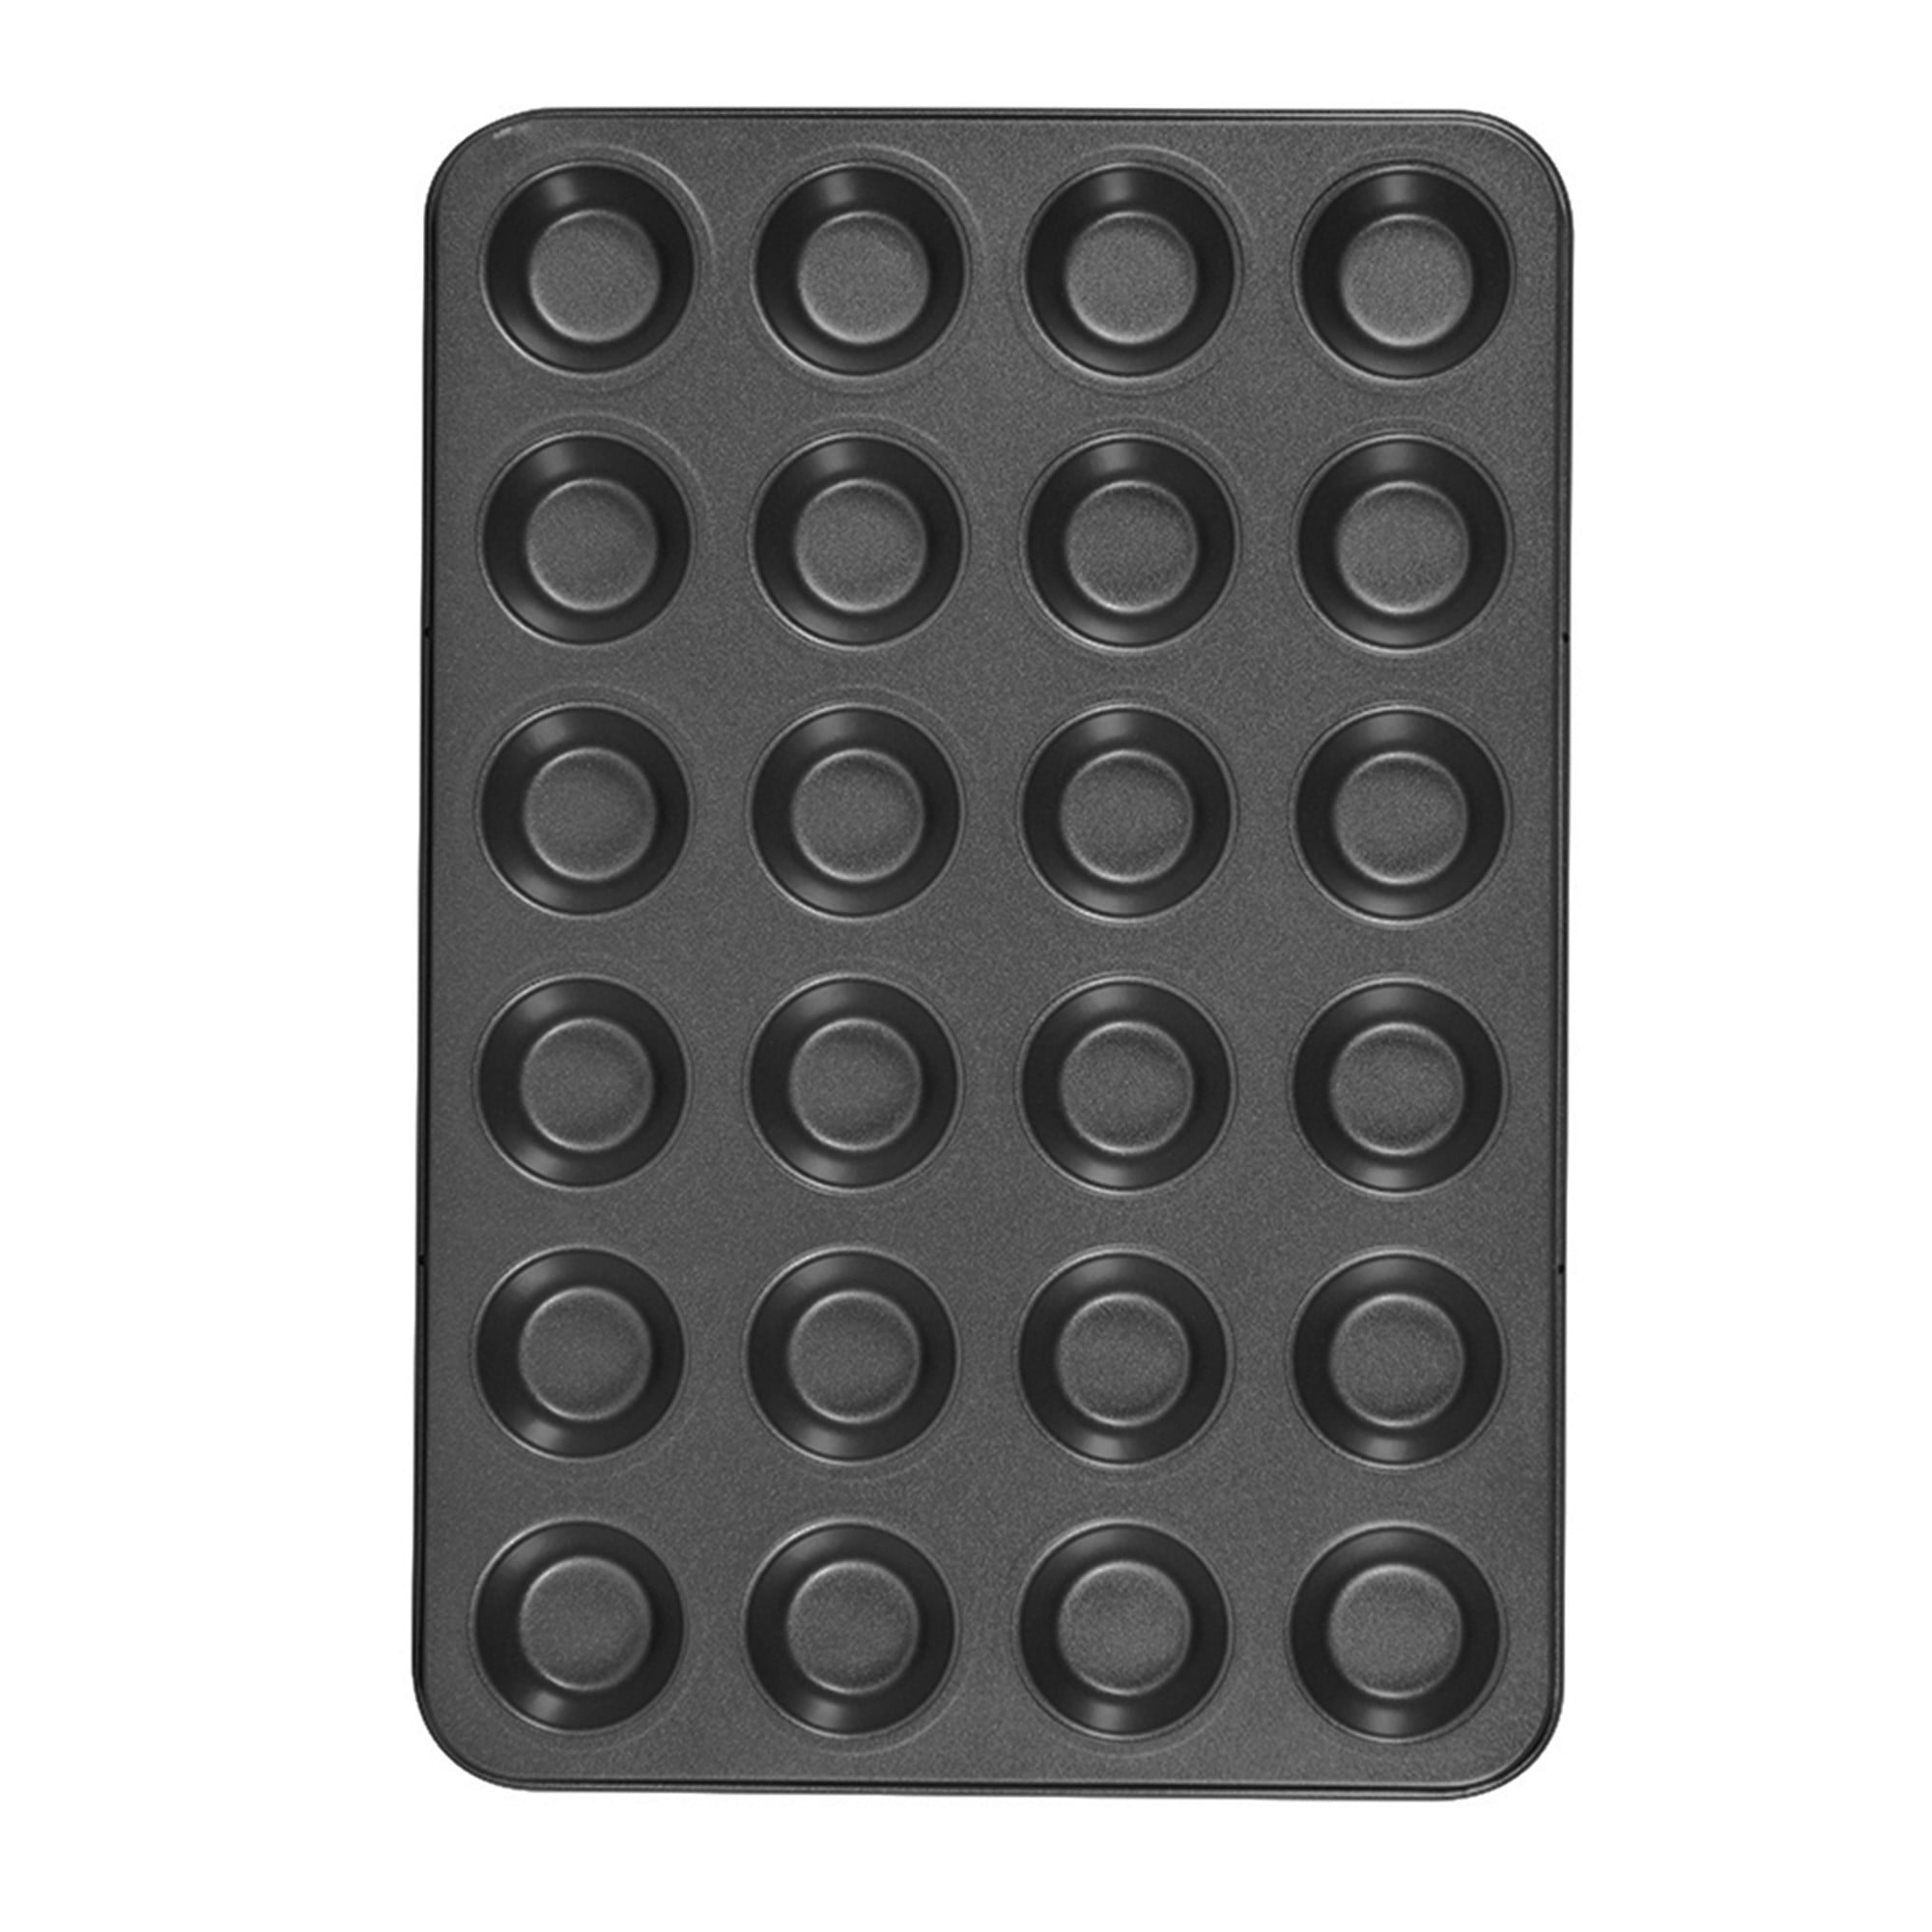 Details about   18 individual 6 cup muffin pan by smart chef 